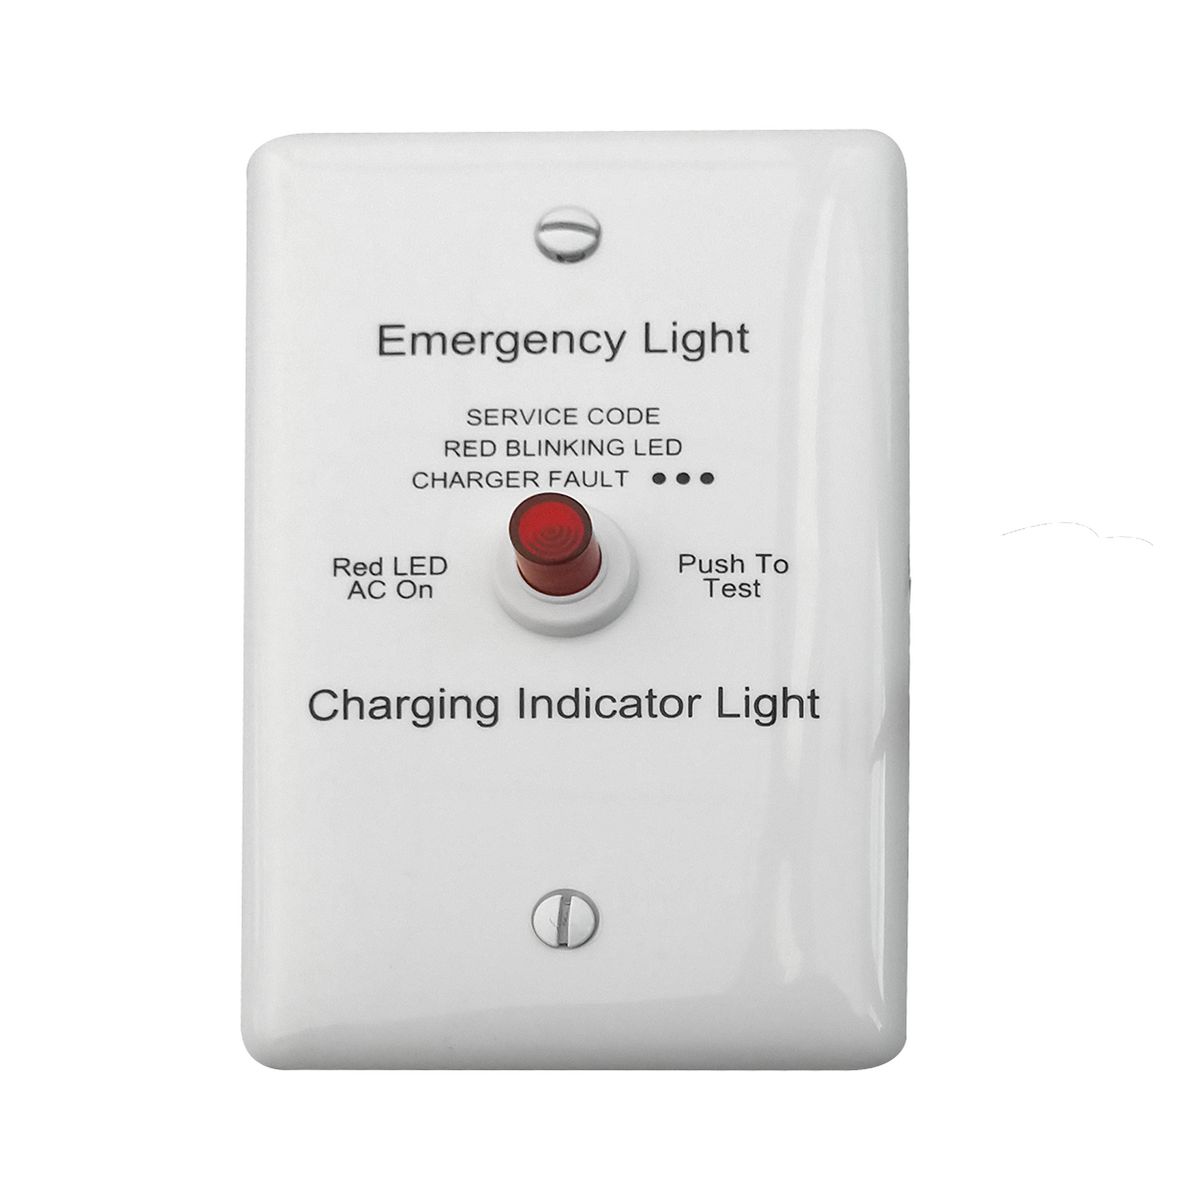 DUAL-LITE PLRTS REMOTE TEST SWITCH / CHARGE INDICATOR MODULE. FITS  SINGLE-GANG BOX. COMPATABLE WITH THE PLD10/PLD10M SERIES EMERGENCY LED  BATTERY PACK.